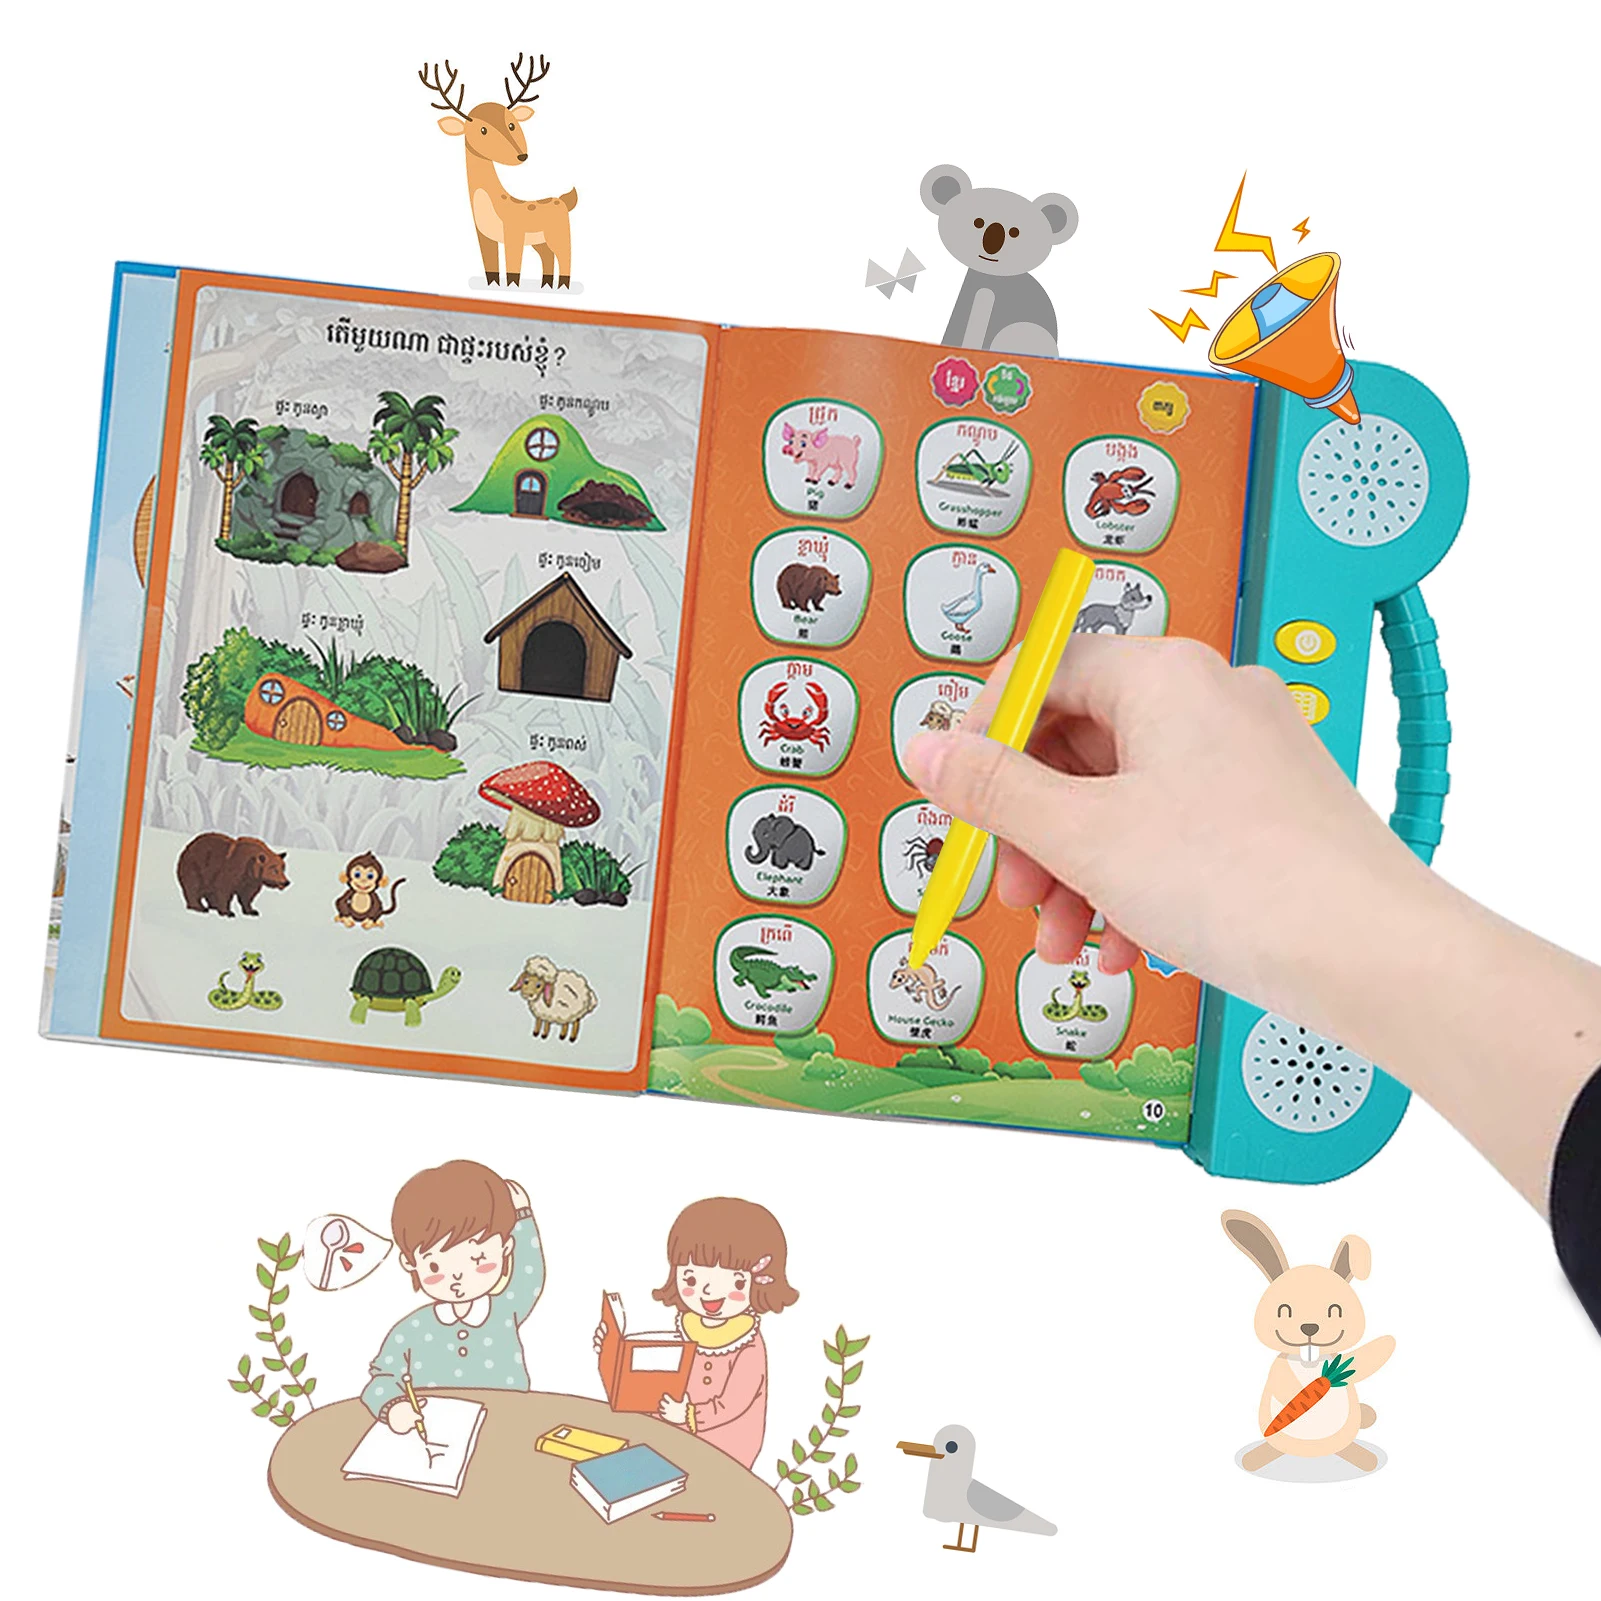 

Language Learning Book Language Reading Book Multifunctional Reading Cognitive Study Toys For Child Development